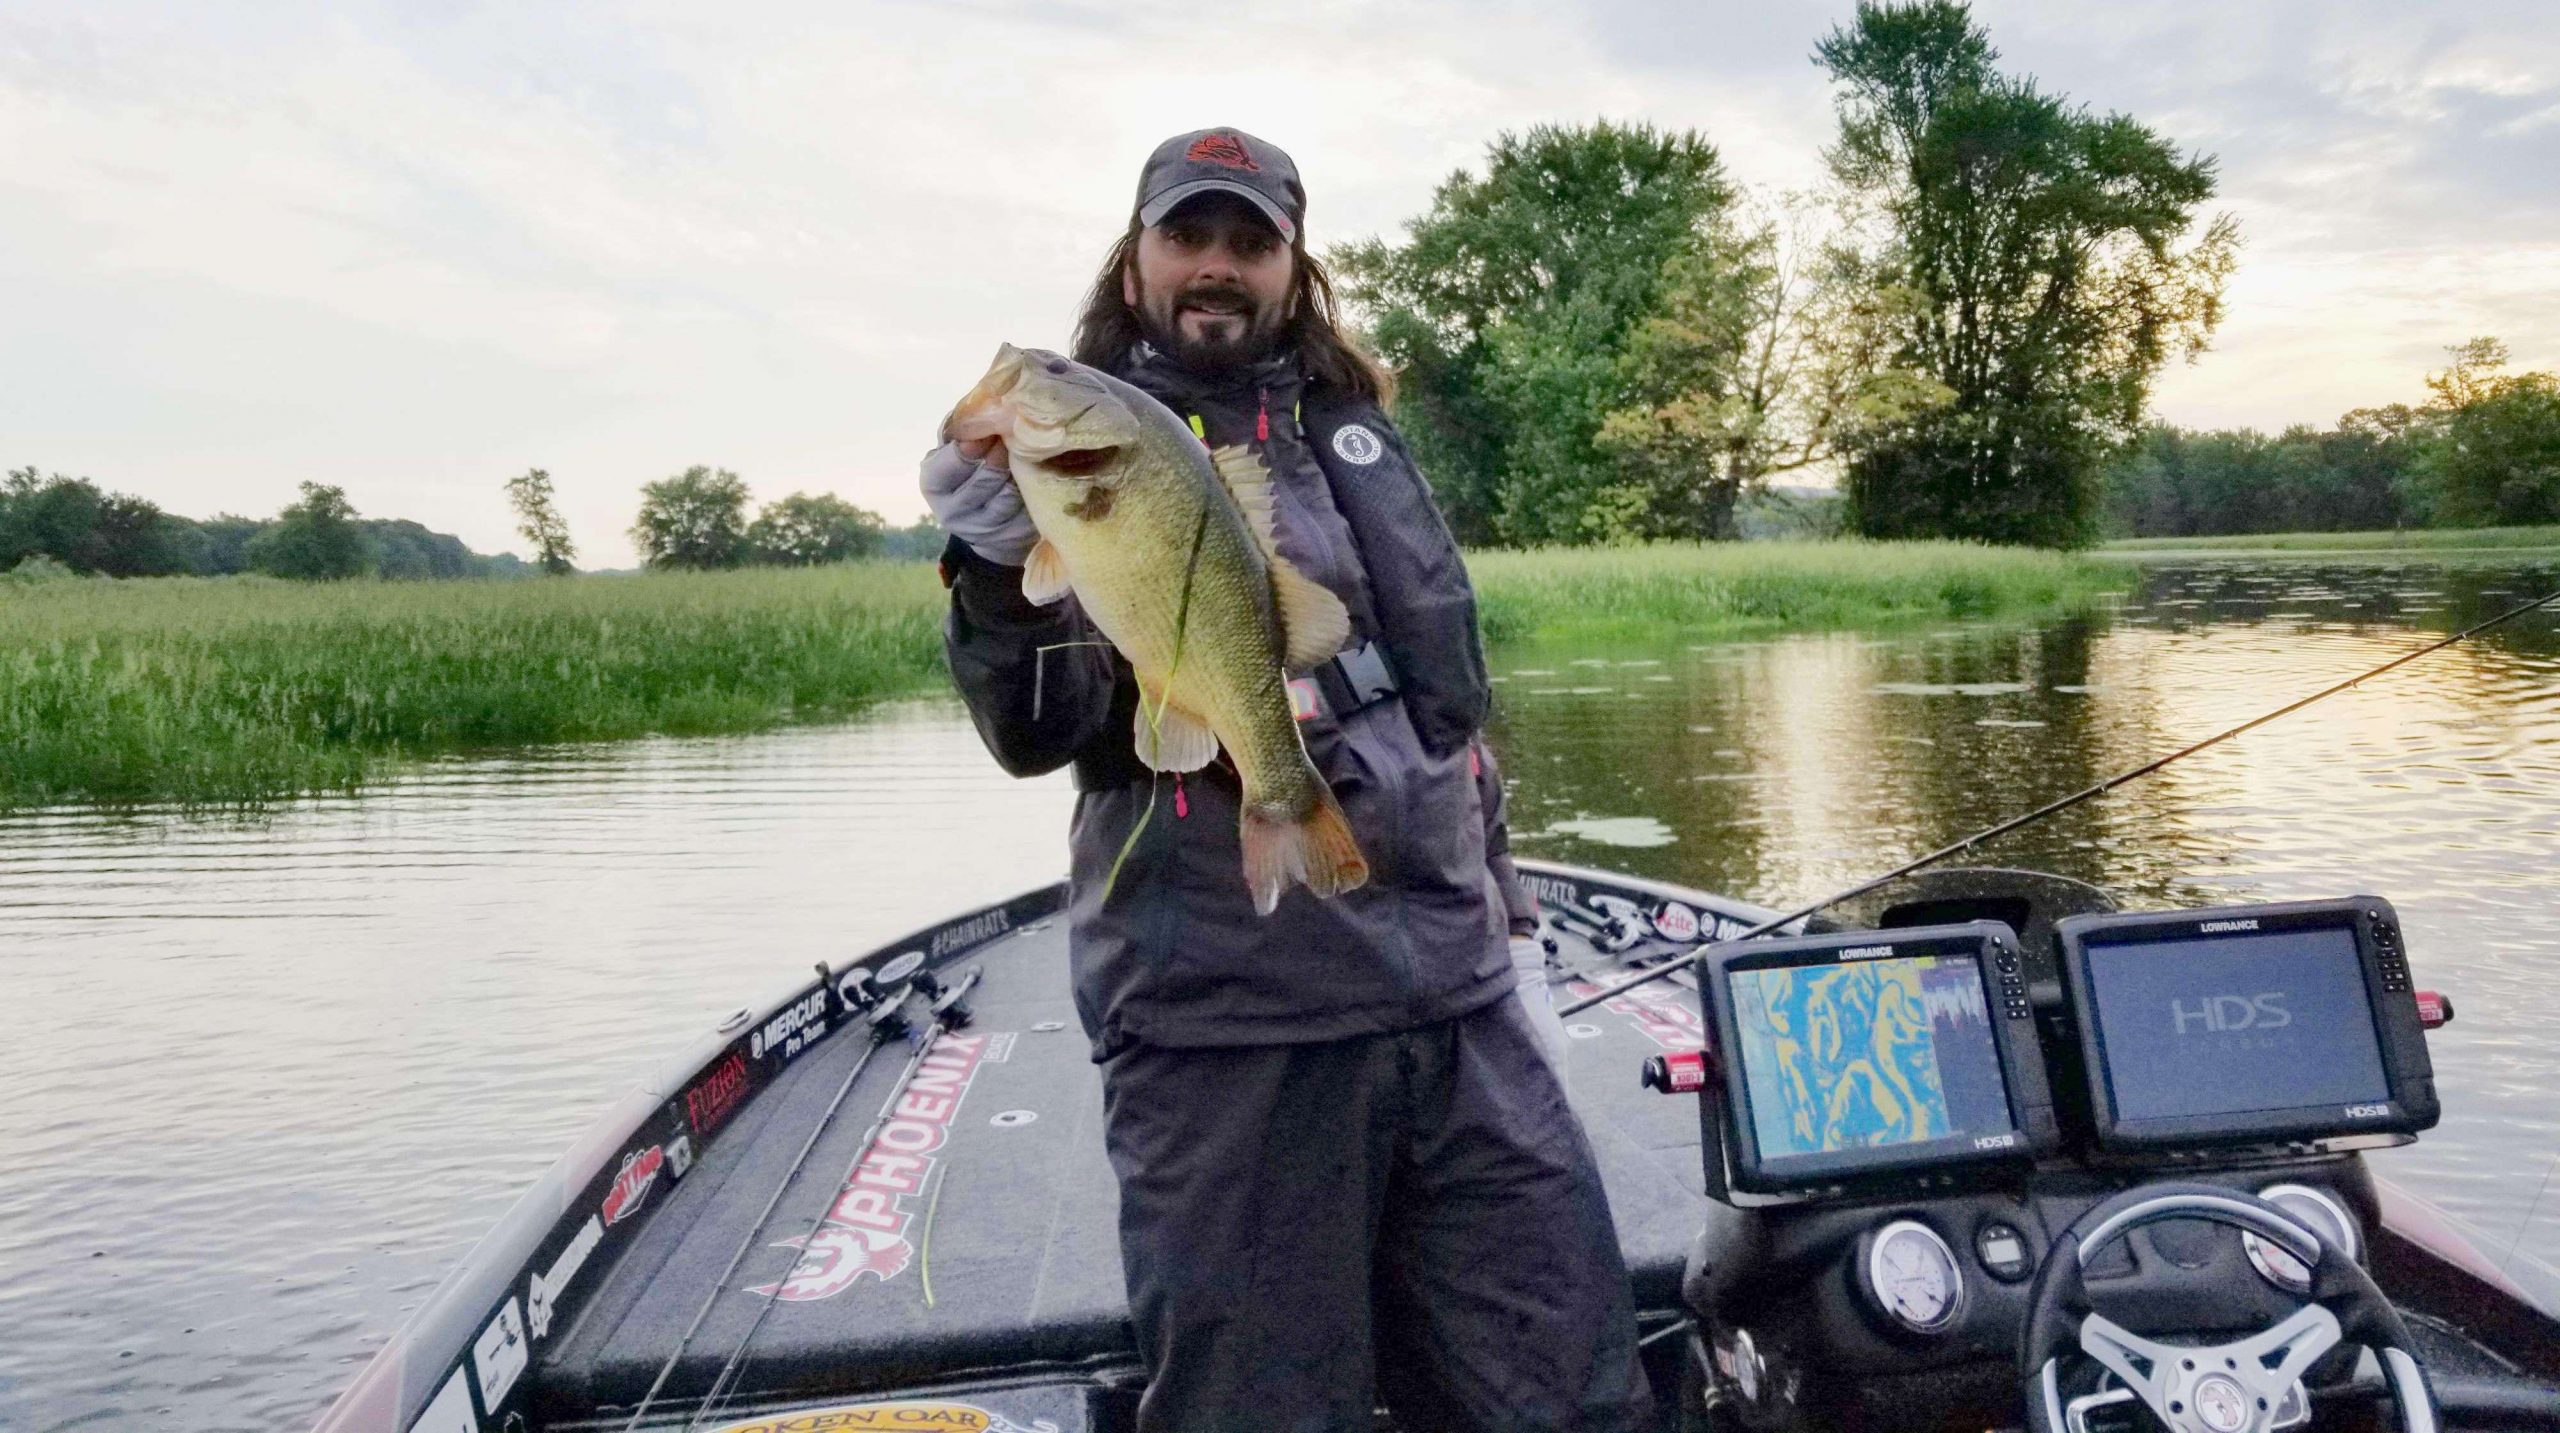 <h4>Chris Groh</h4>
Spring Grove, Ill. <br>
Qualified via 2019 Elite Series<br>
